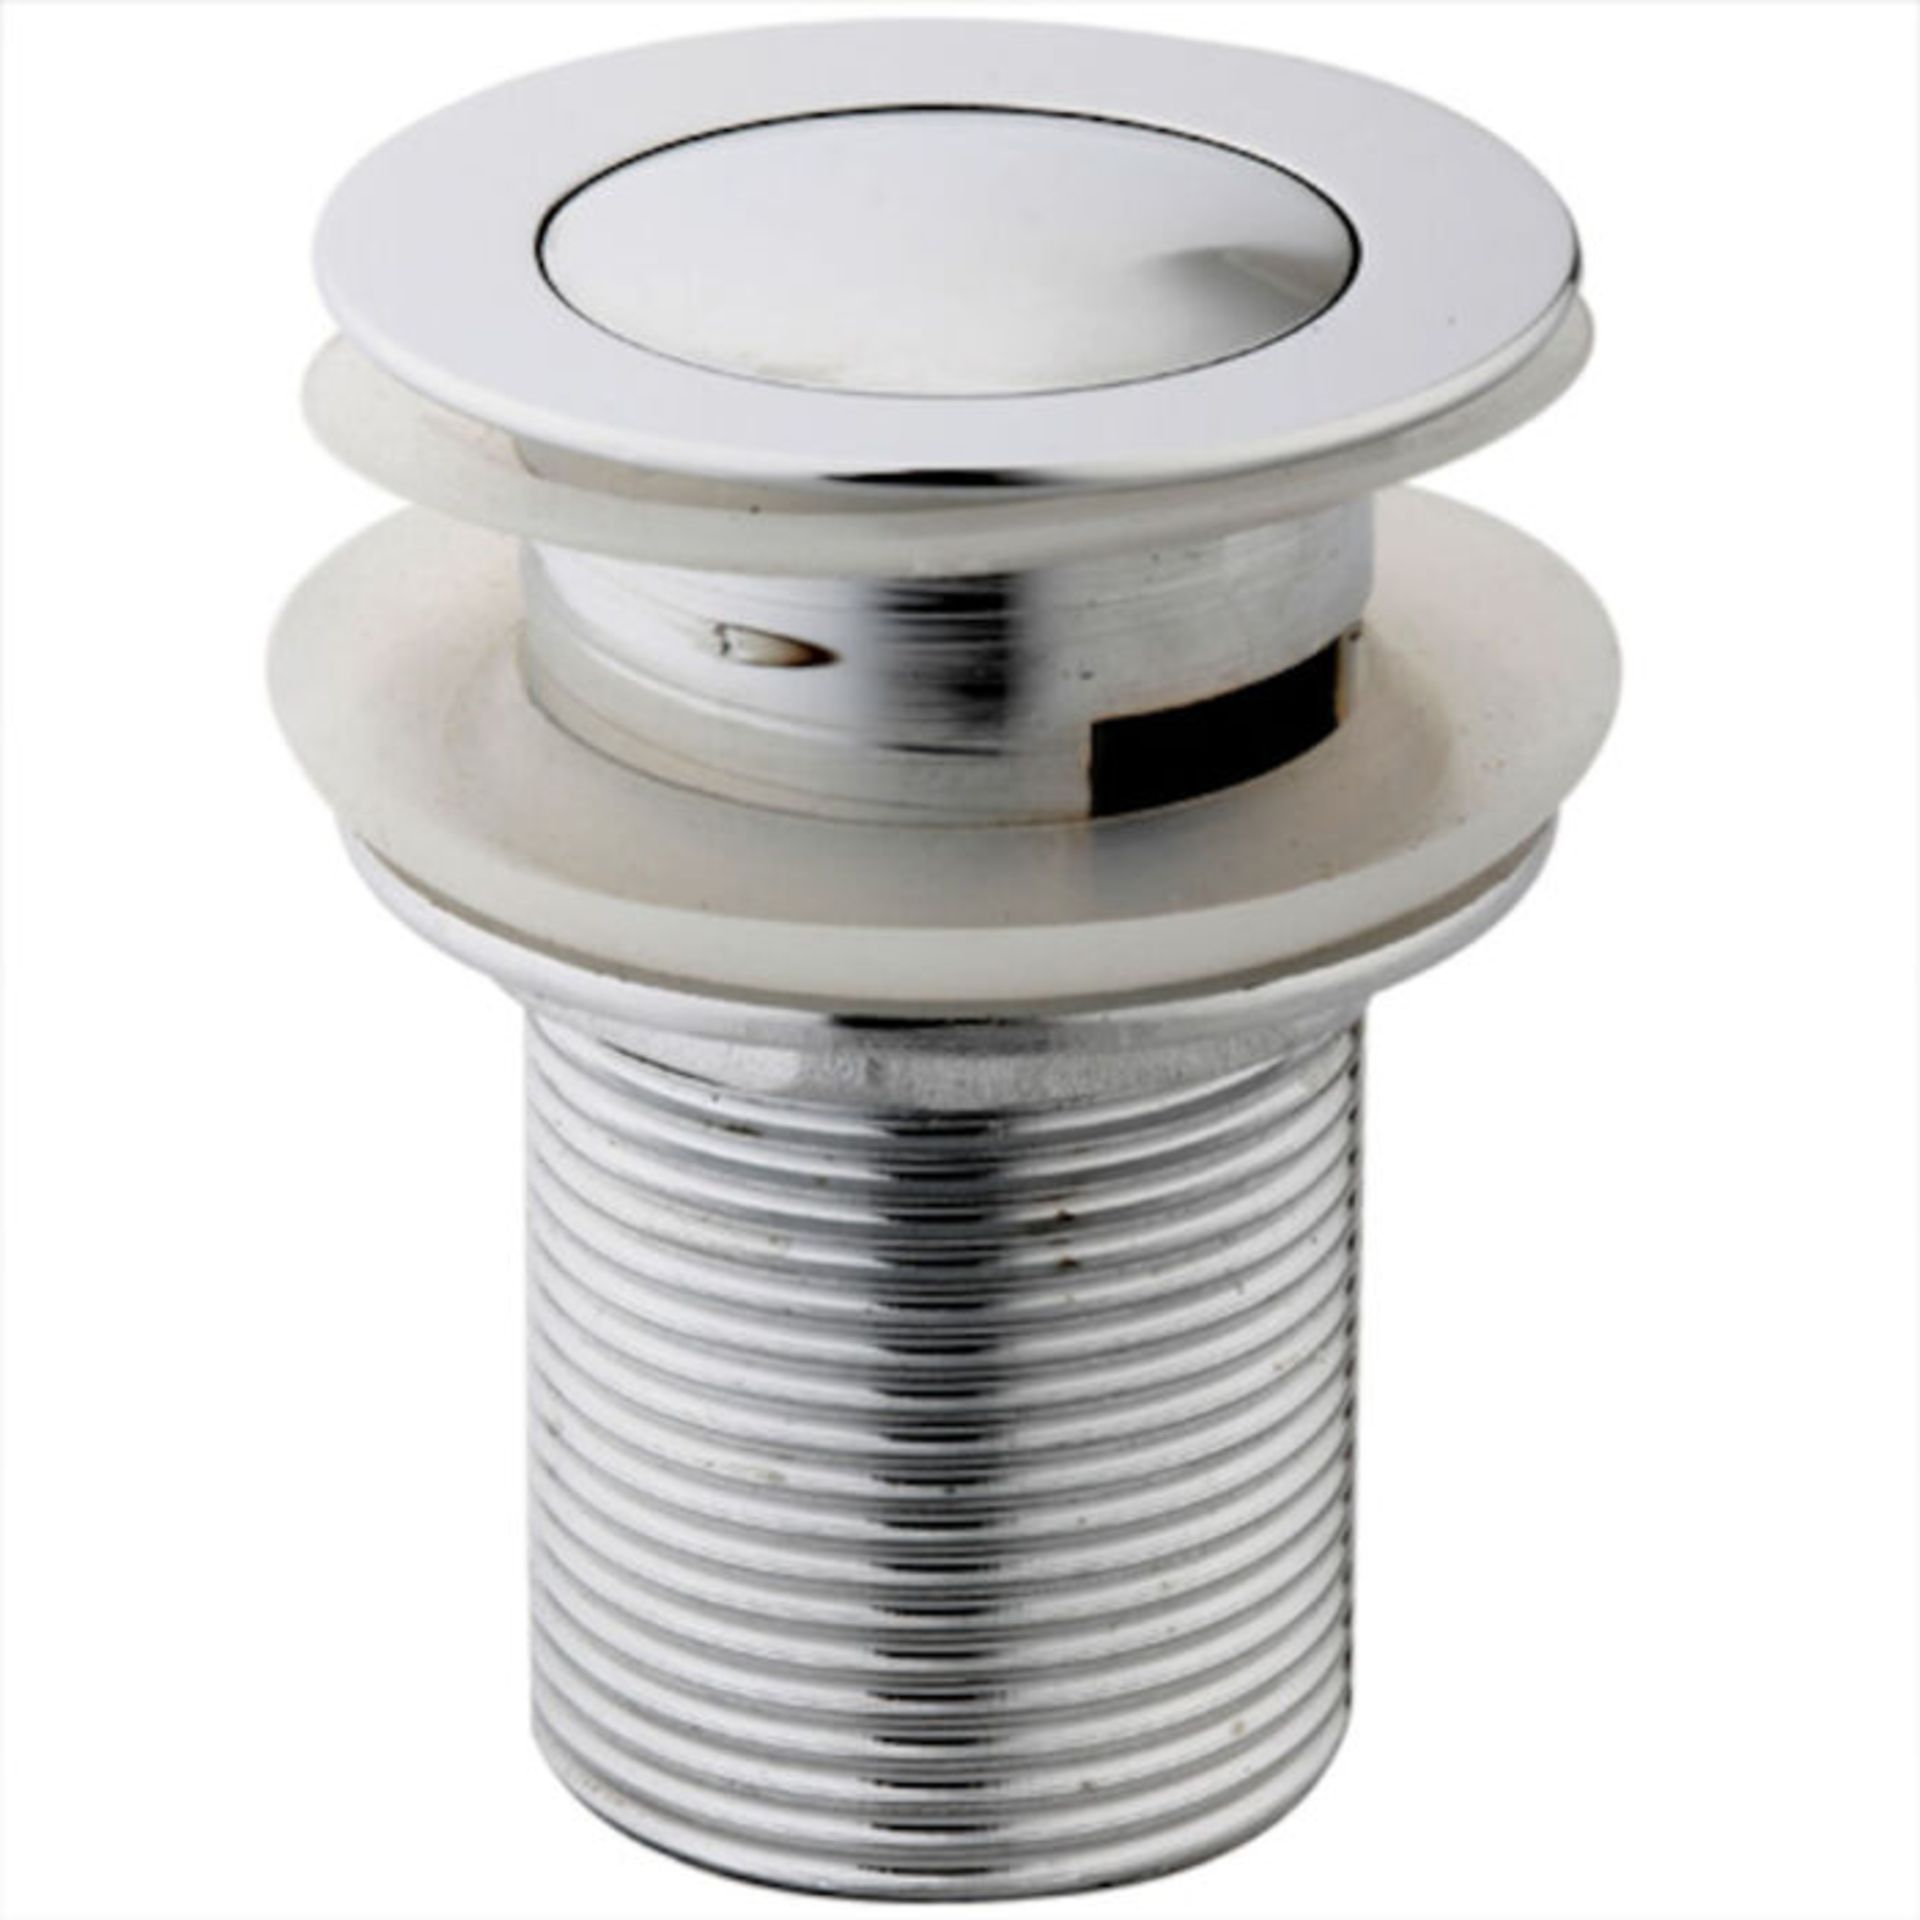 (PP1015) Basin Waste - Slotted Push Button Pop-Up Made with zinc with solid brass components ...